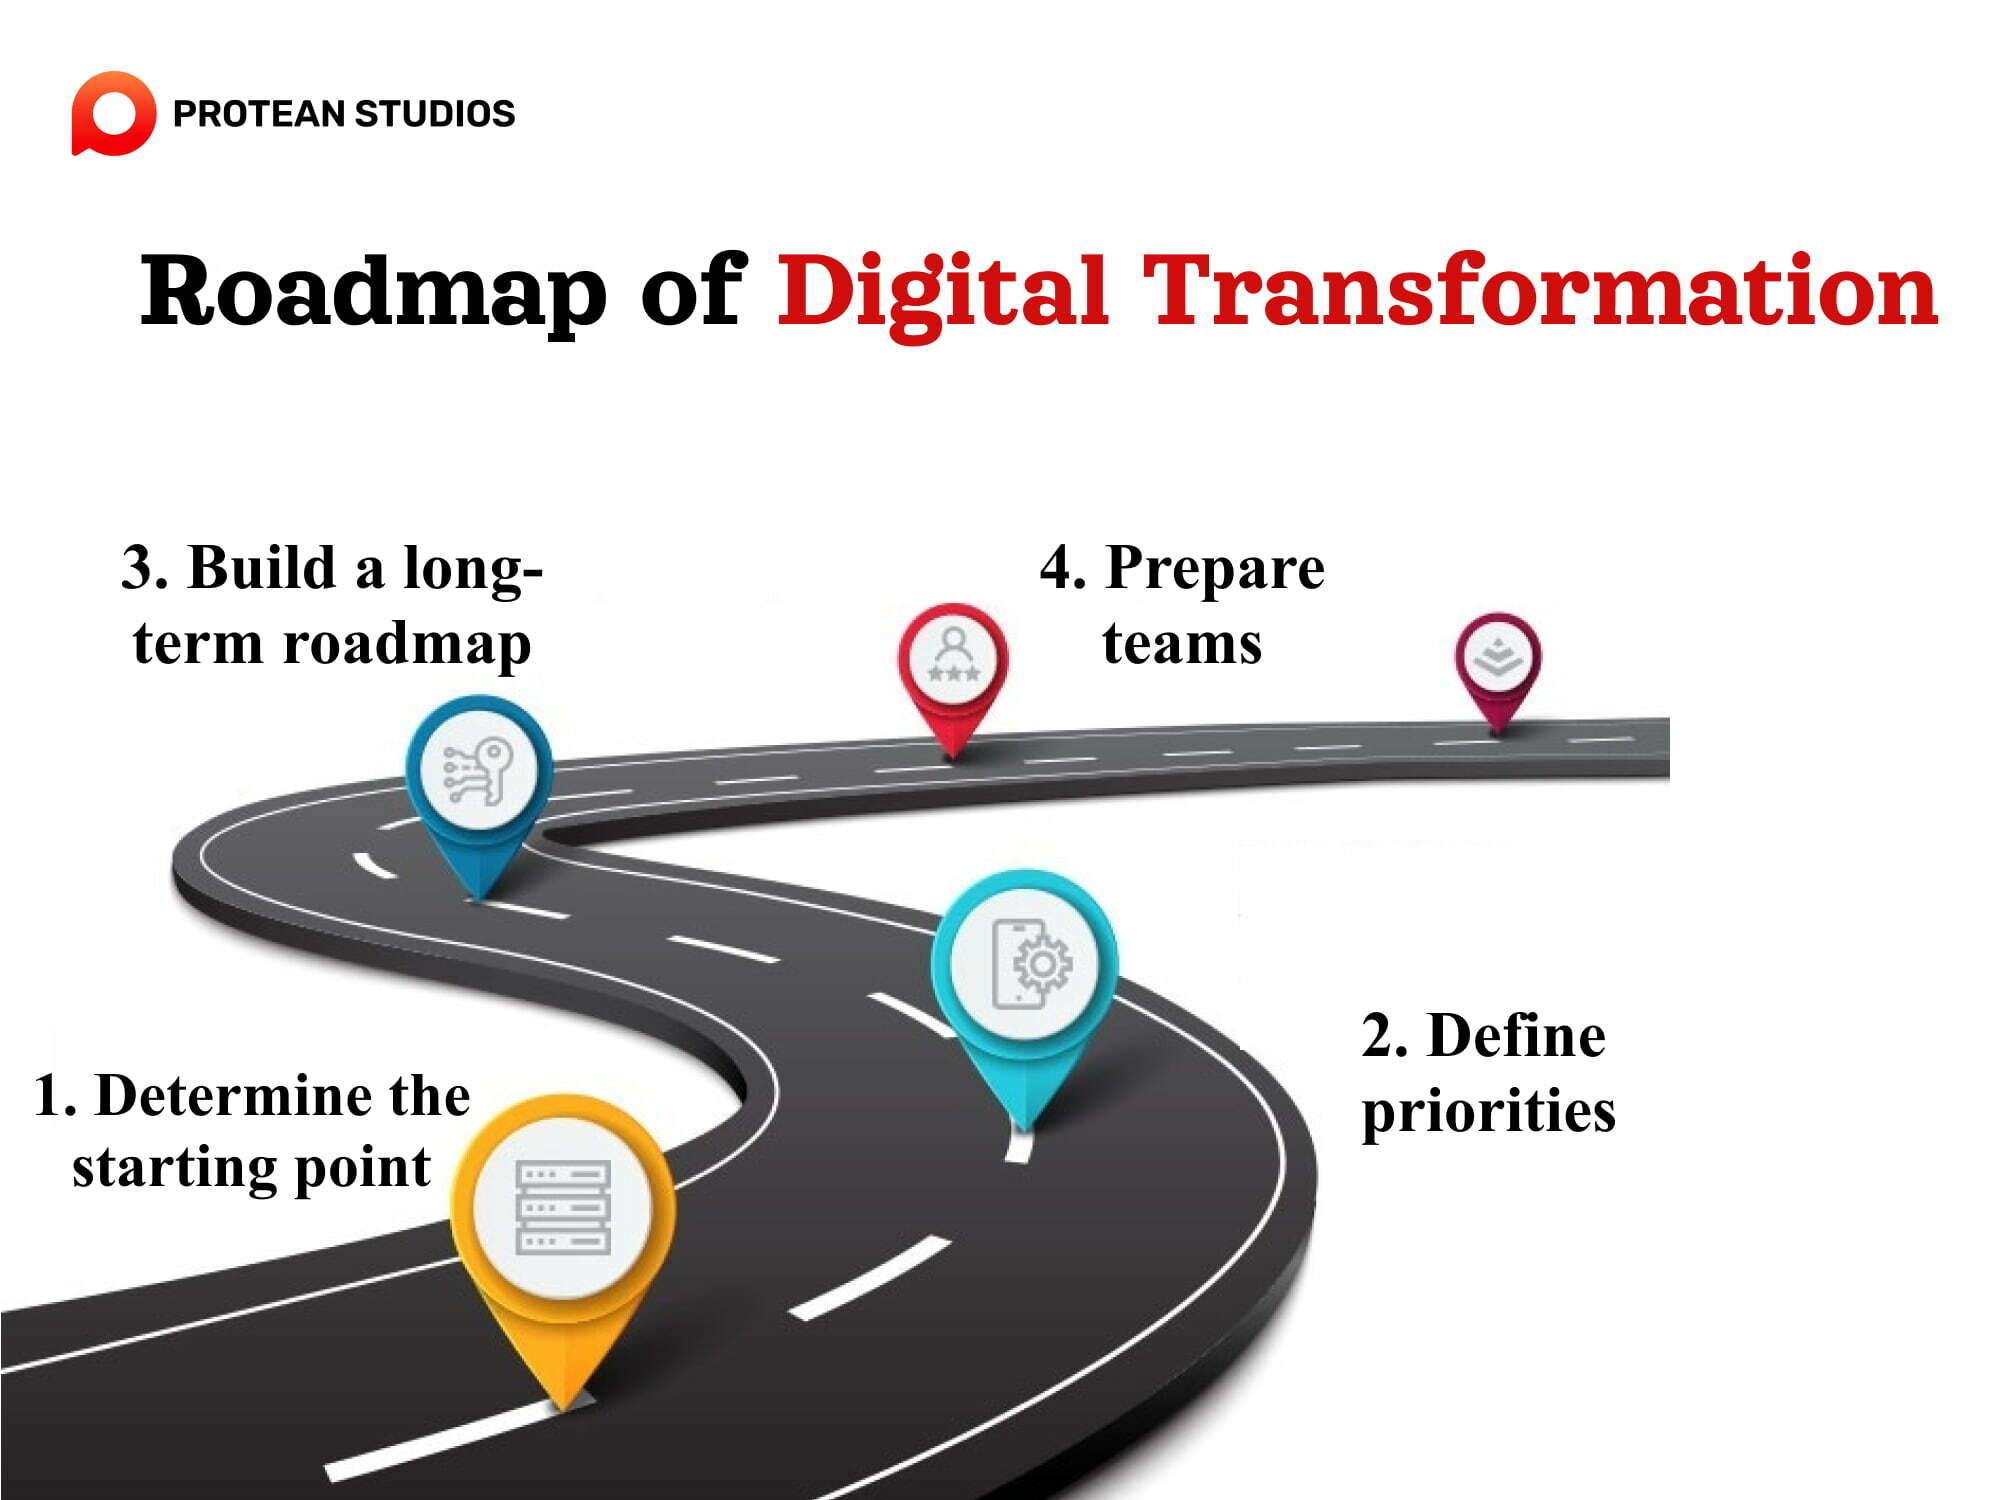 How to detailed prepare for digital business transformation